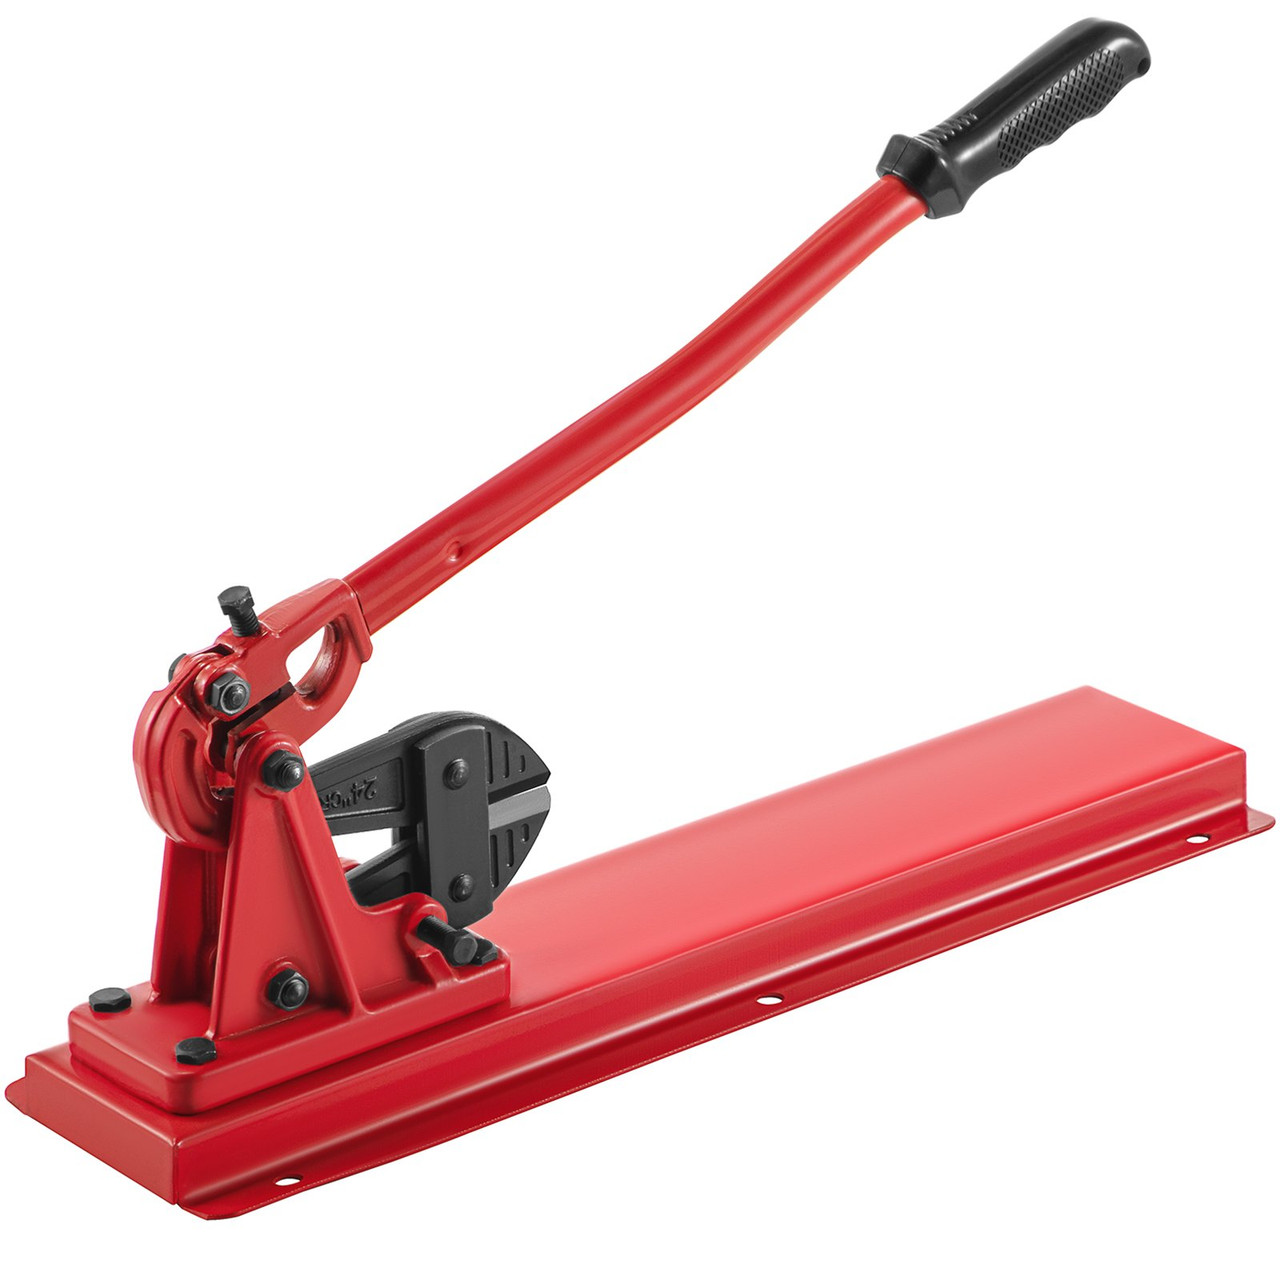 24" Bench Type Hand Swager, Cutting Capacity 3/8" Bolt Cutter Bench Type, Hardness 35-45HRC Crimping Tool Bench Wire Rope Cable, Red Swaging Machine for Swaging and Cutting, Arm Bench Swager